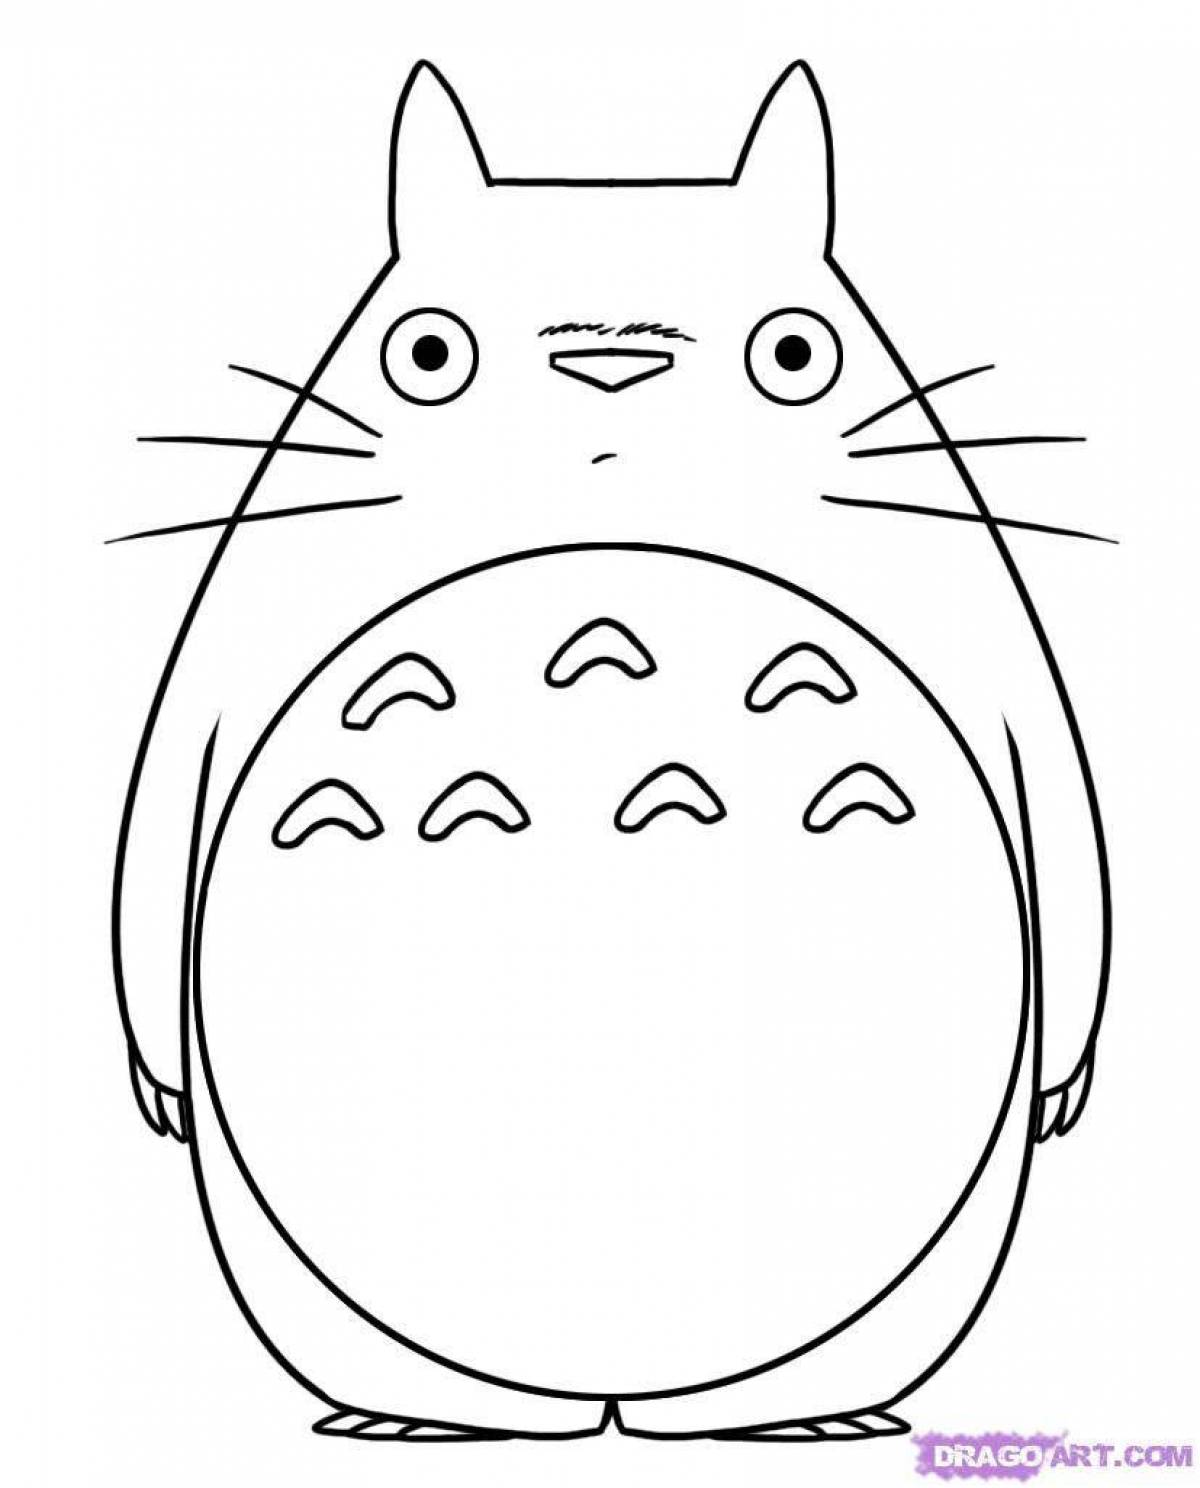 Totoro coloring while playing